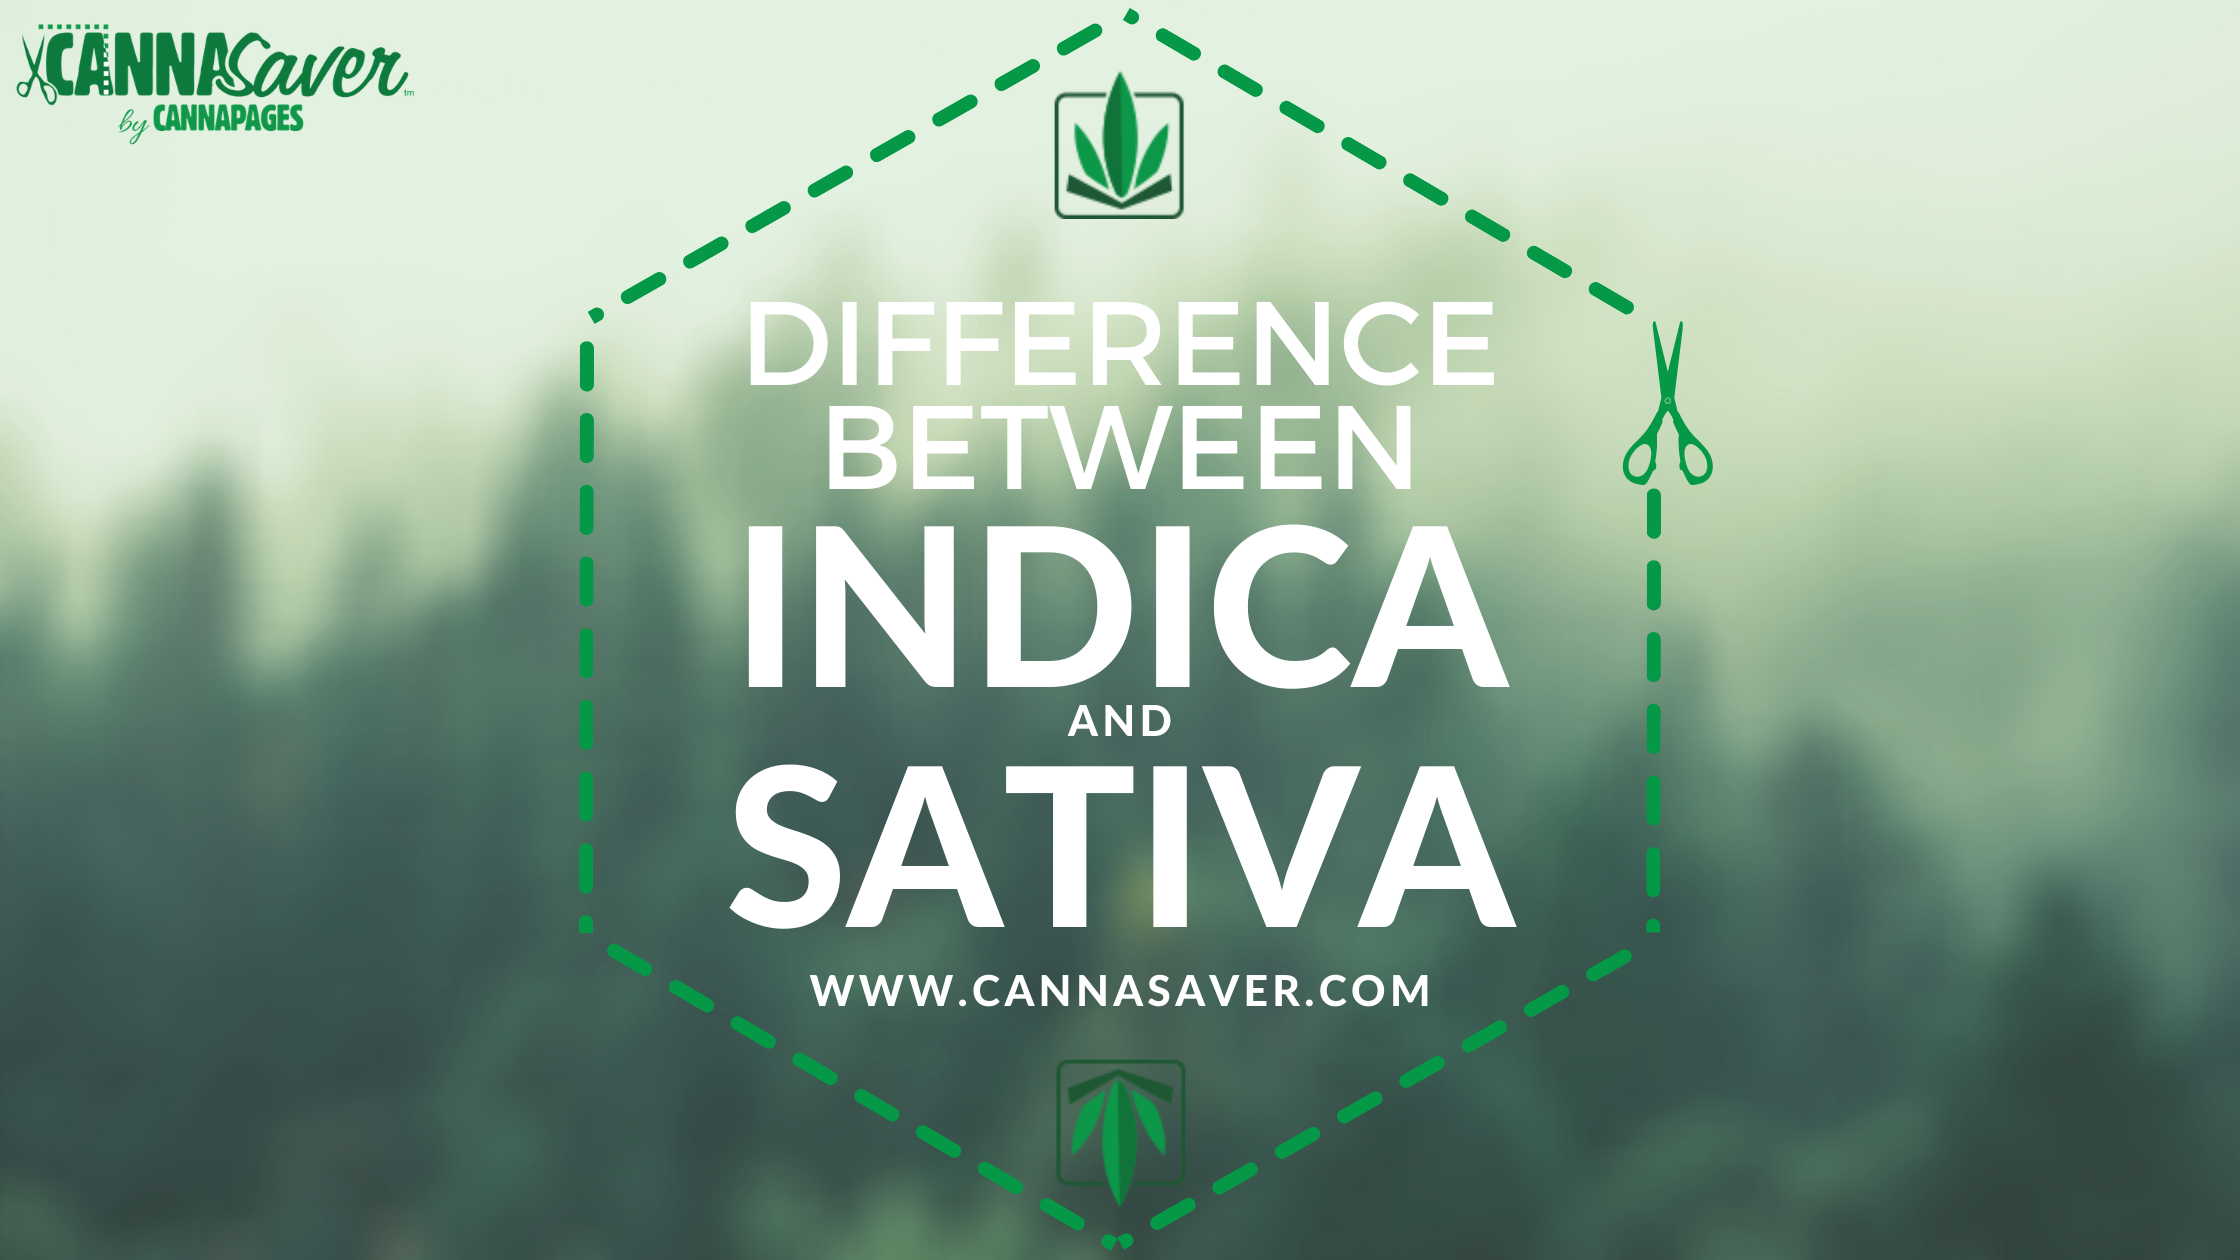 Is There Really a Difference Between Indica and Sativa